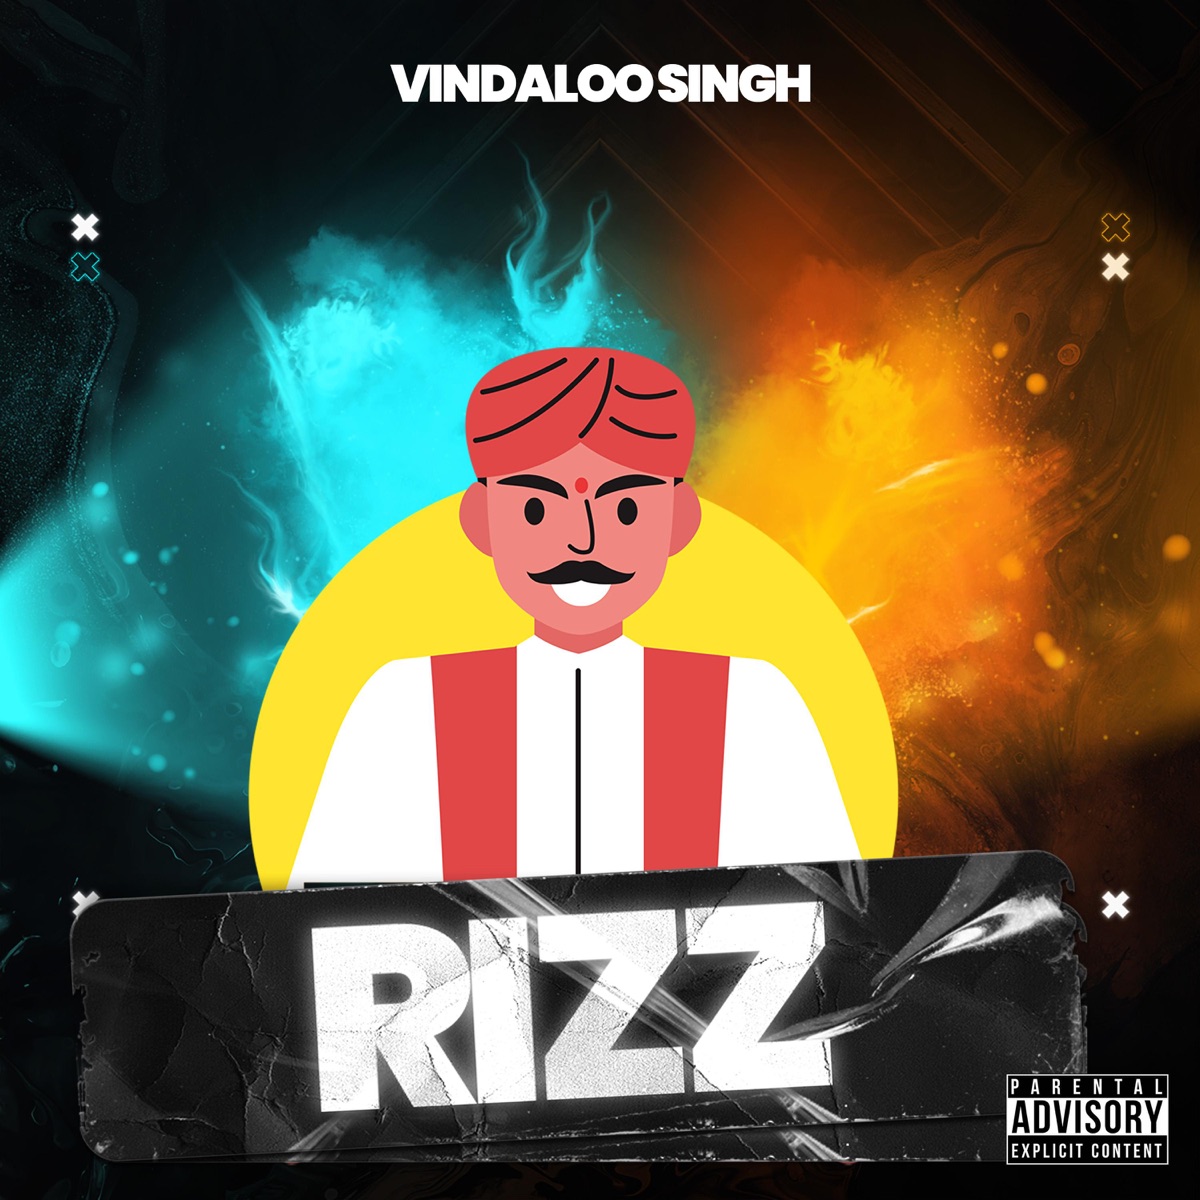 Funny Indian Christmas Hits by Vindaloo Singh on Apple Music